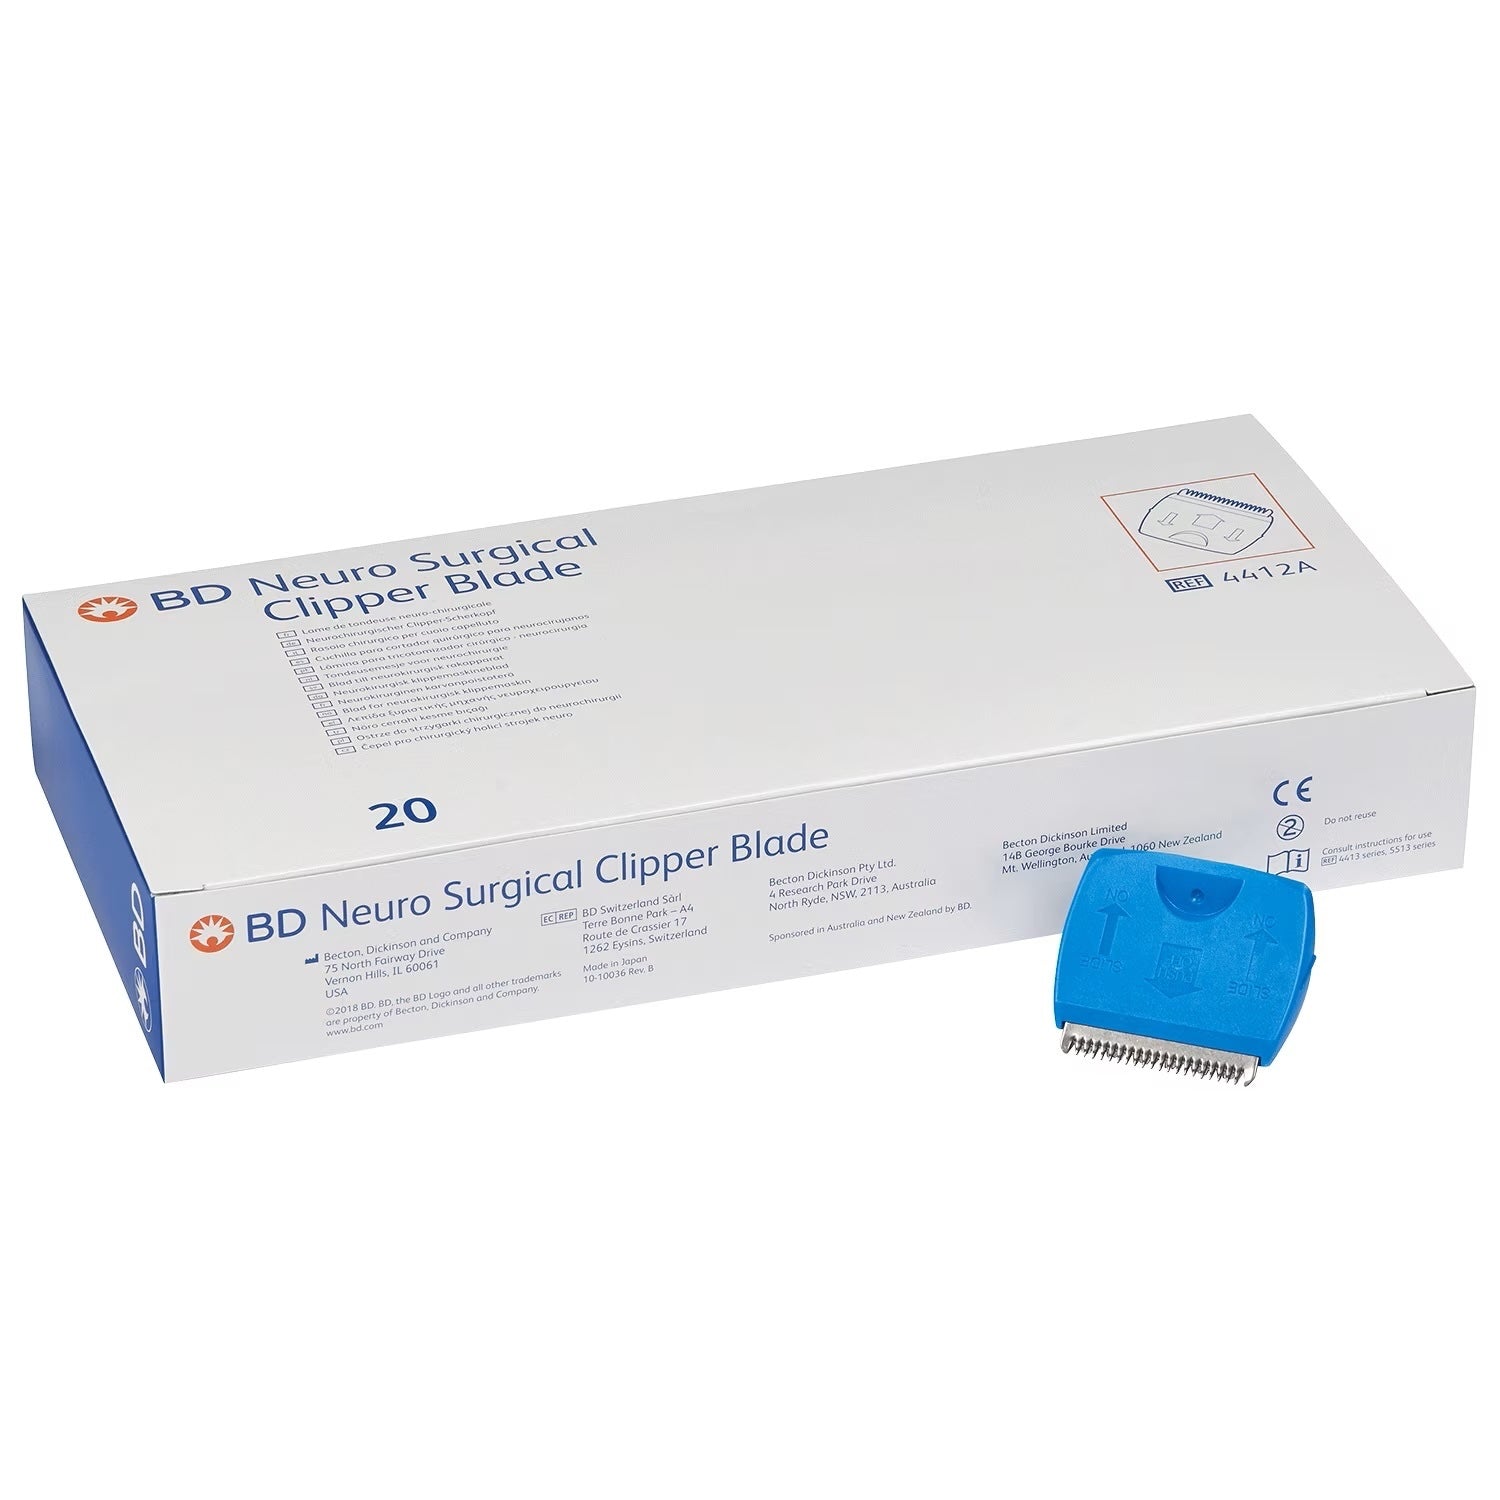 BD Neuro Surgical Clipper Blade | Pack of 20 | Short Expiry Date